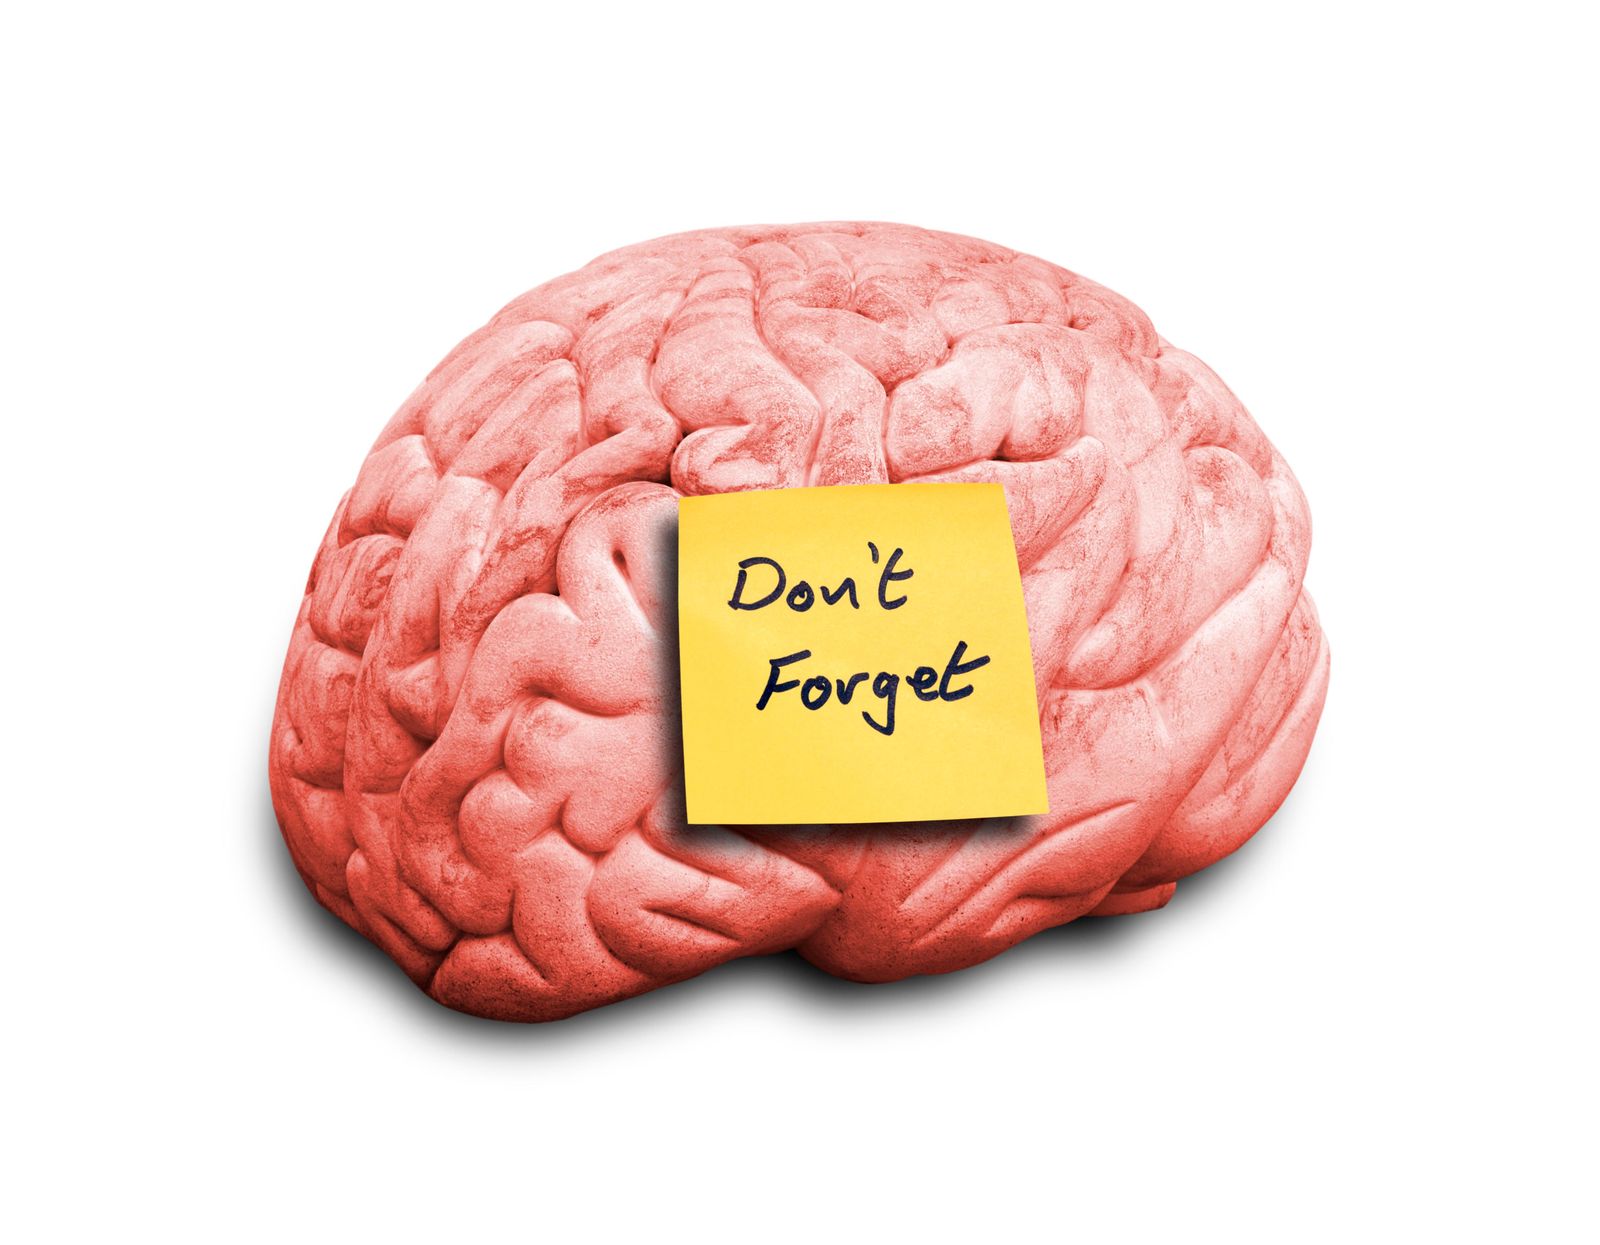 Digital Brain. Dementia and Sticky Notes. Sticky Notes for Dementia. Мозг биология огэ